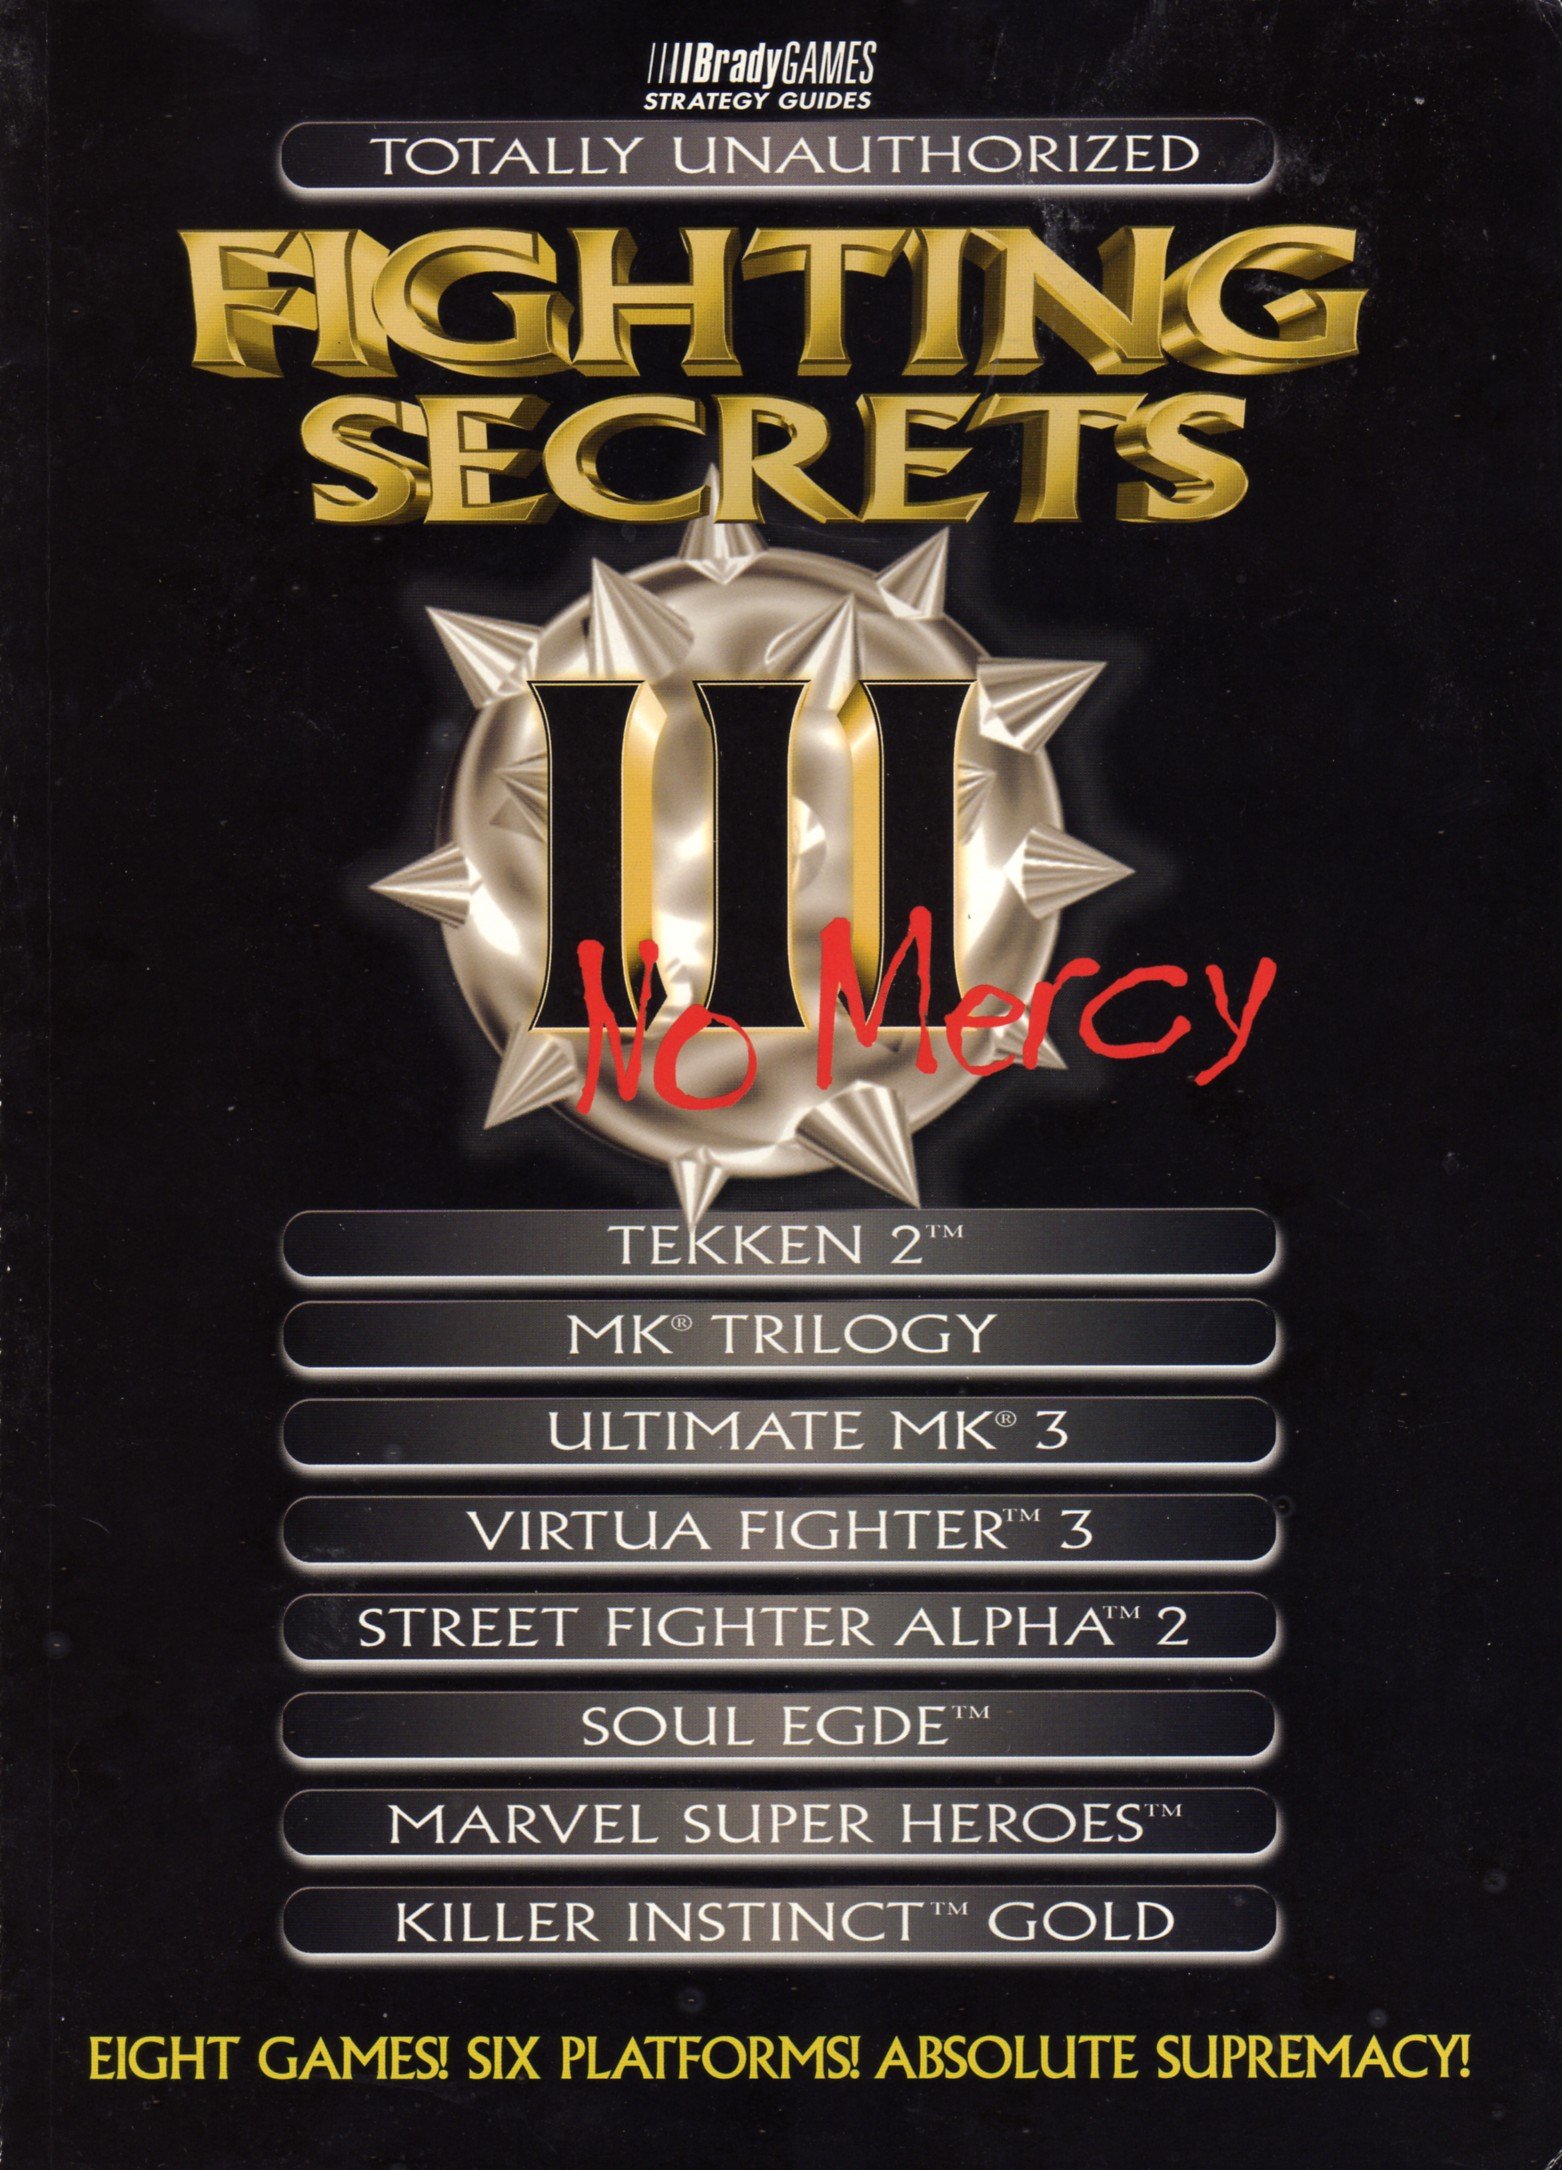 More information about "Totally Unauthorized Fighting Secrets III: No Mercy"